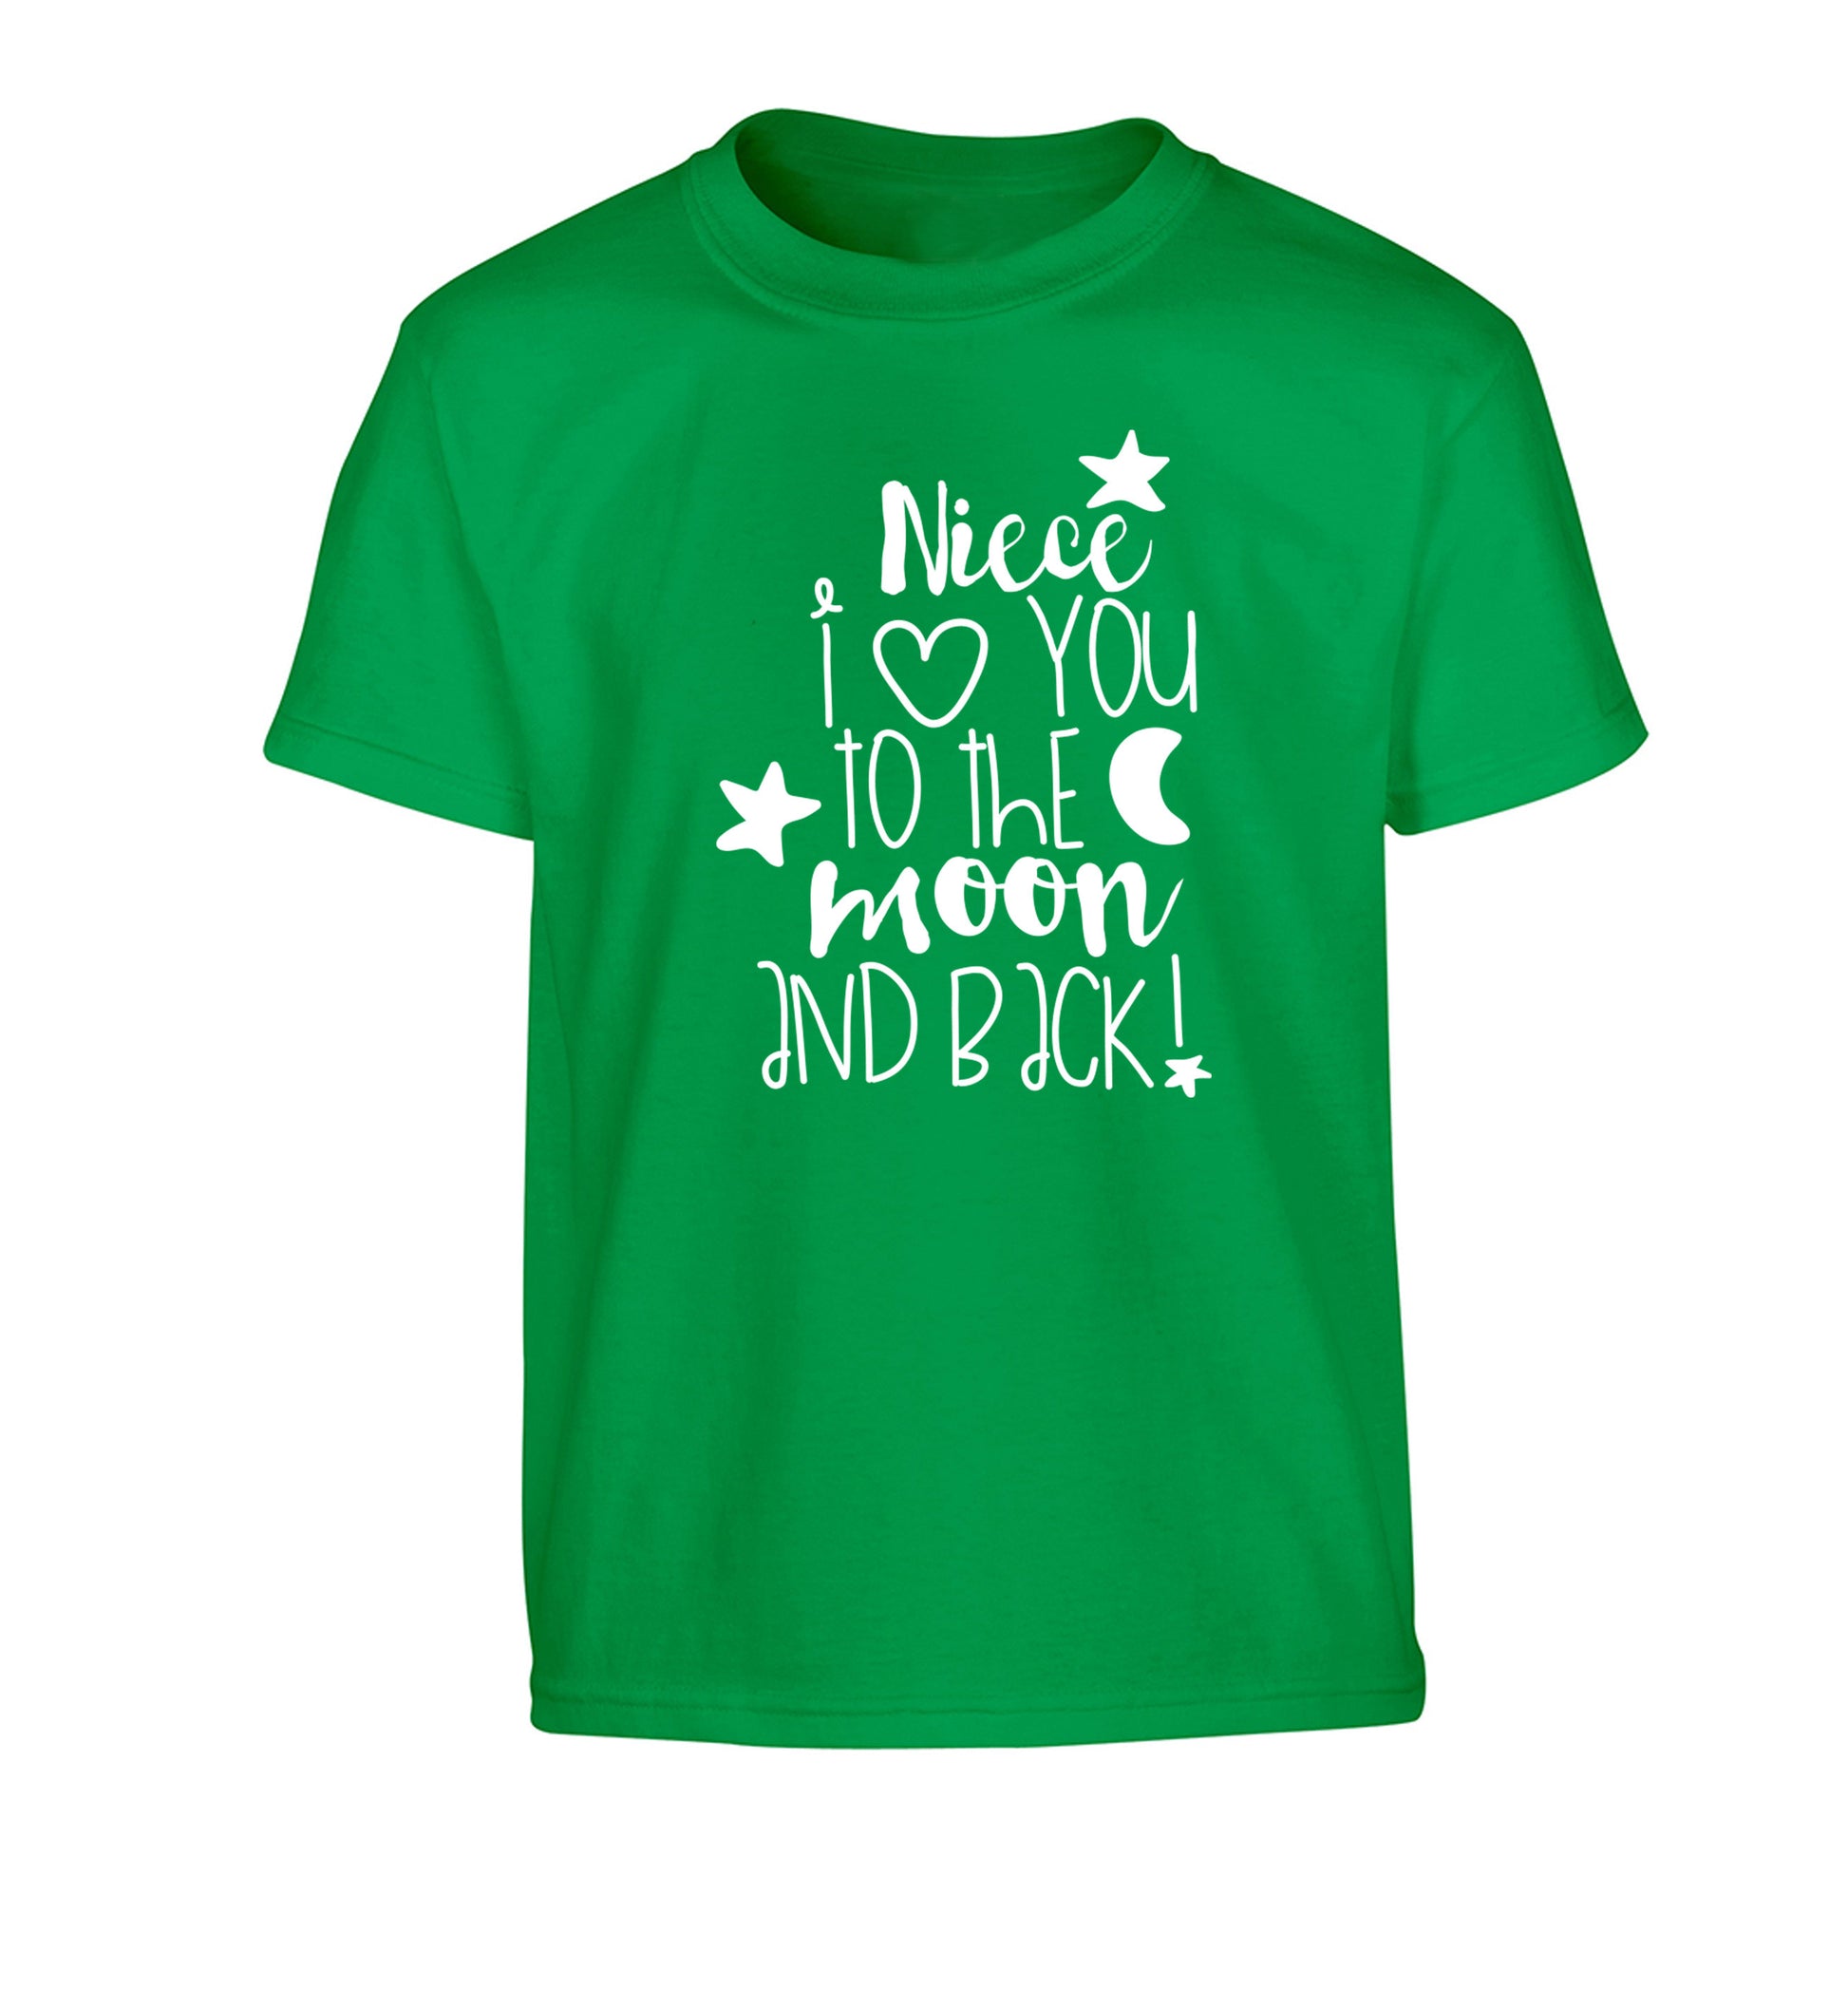 Niece I love you to the moon and back Children's green Tshirt 12-14 Years